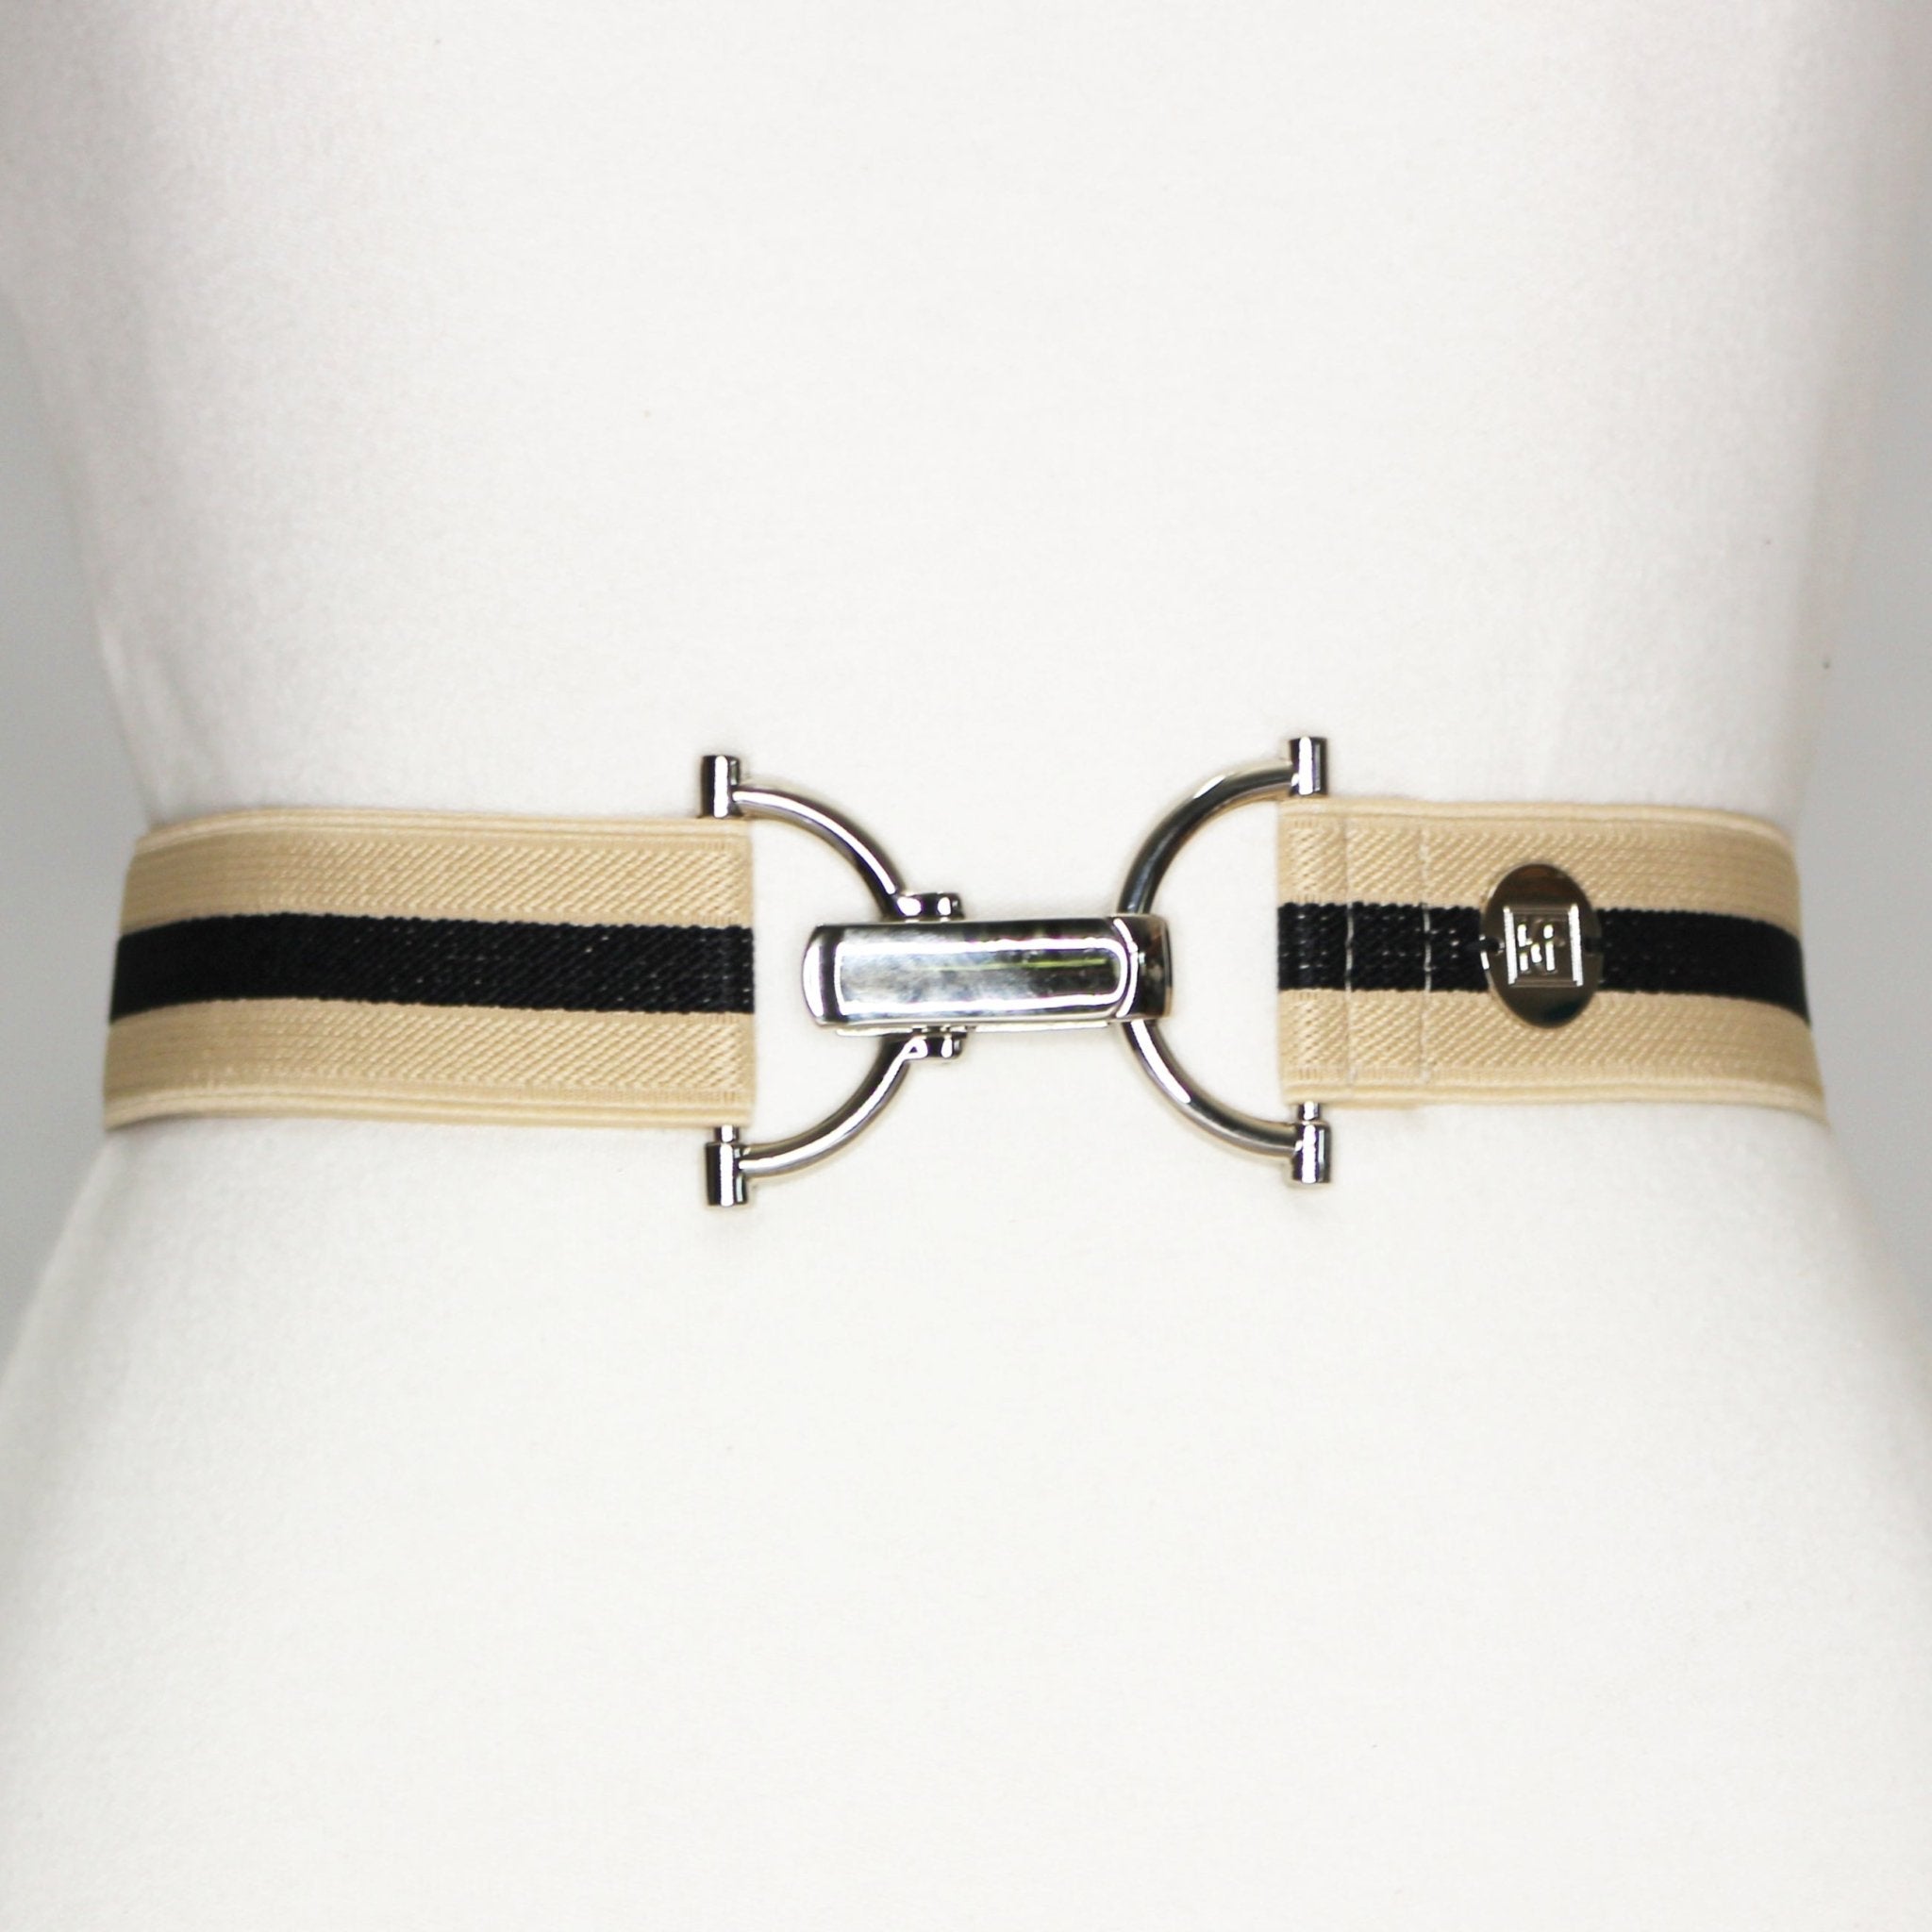 Tan and Black Stripe Elastic 1.5" Riding Belt - Equiluxe Tack